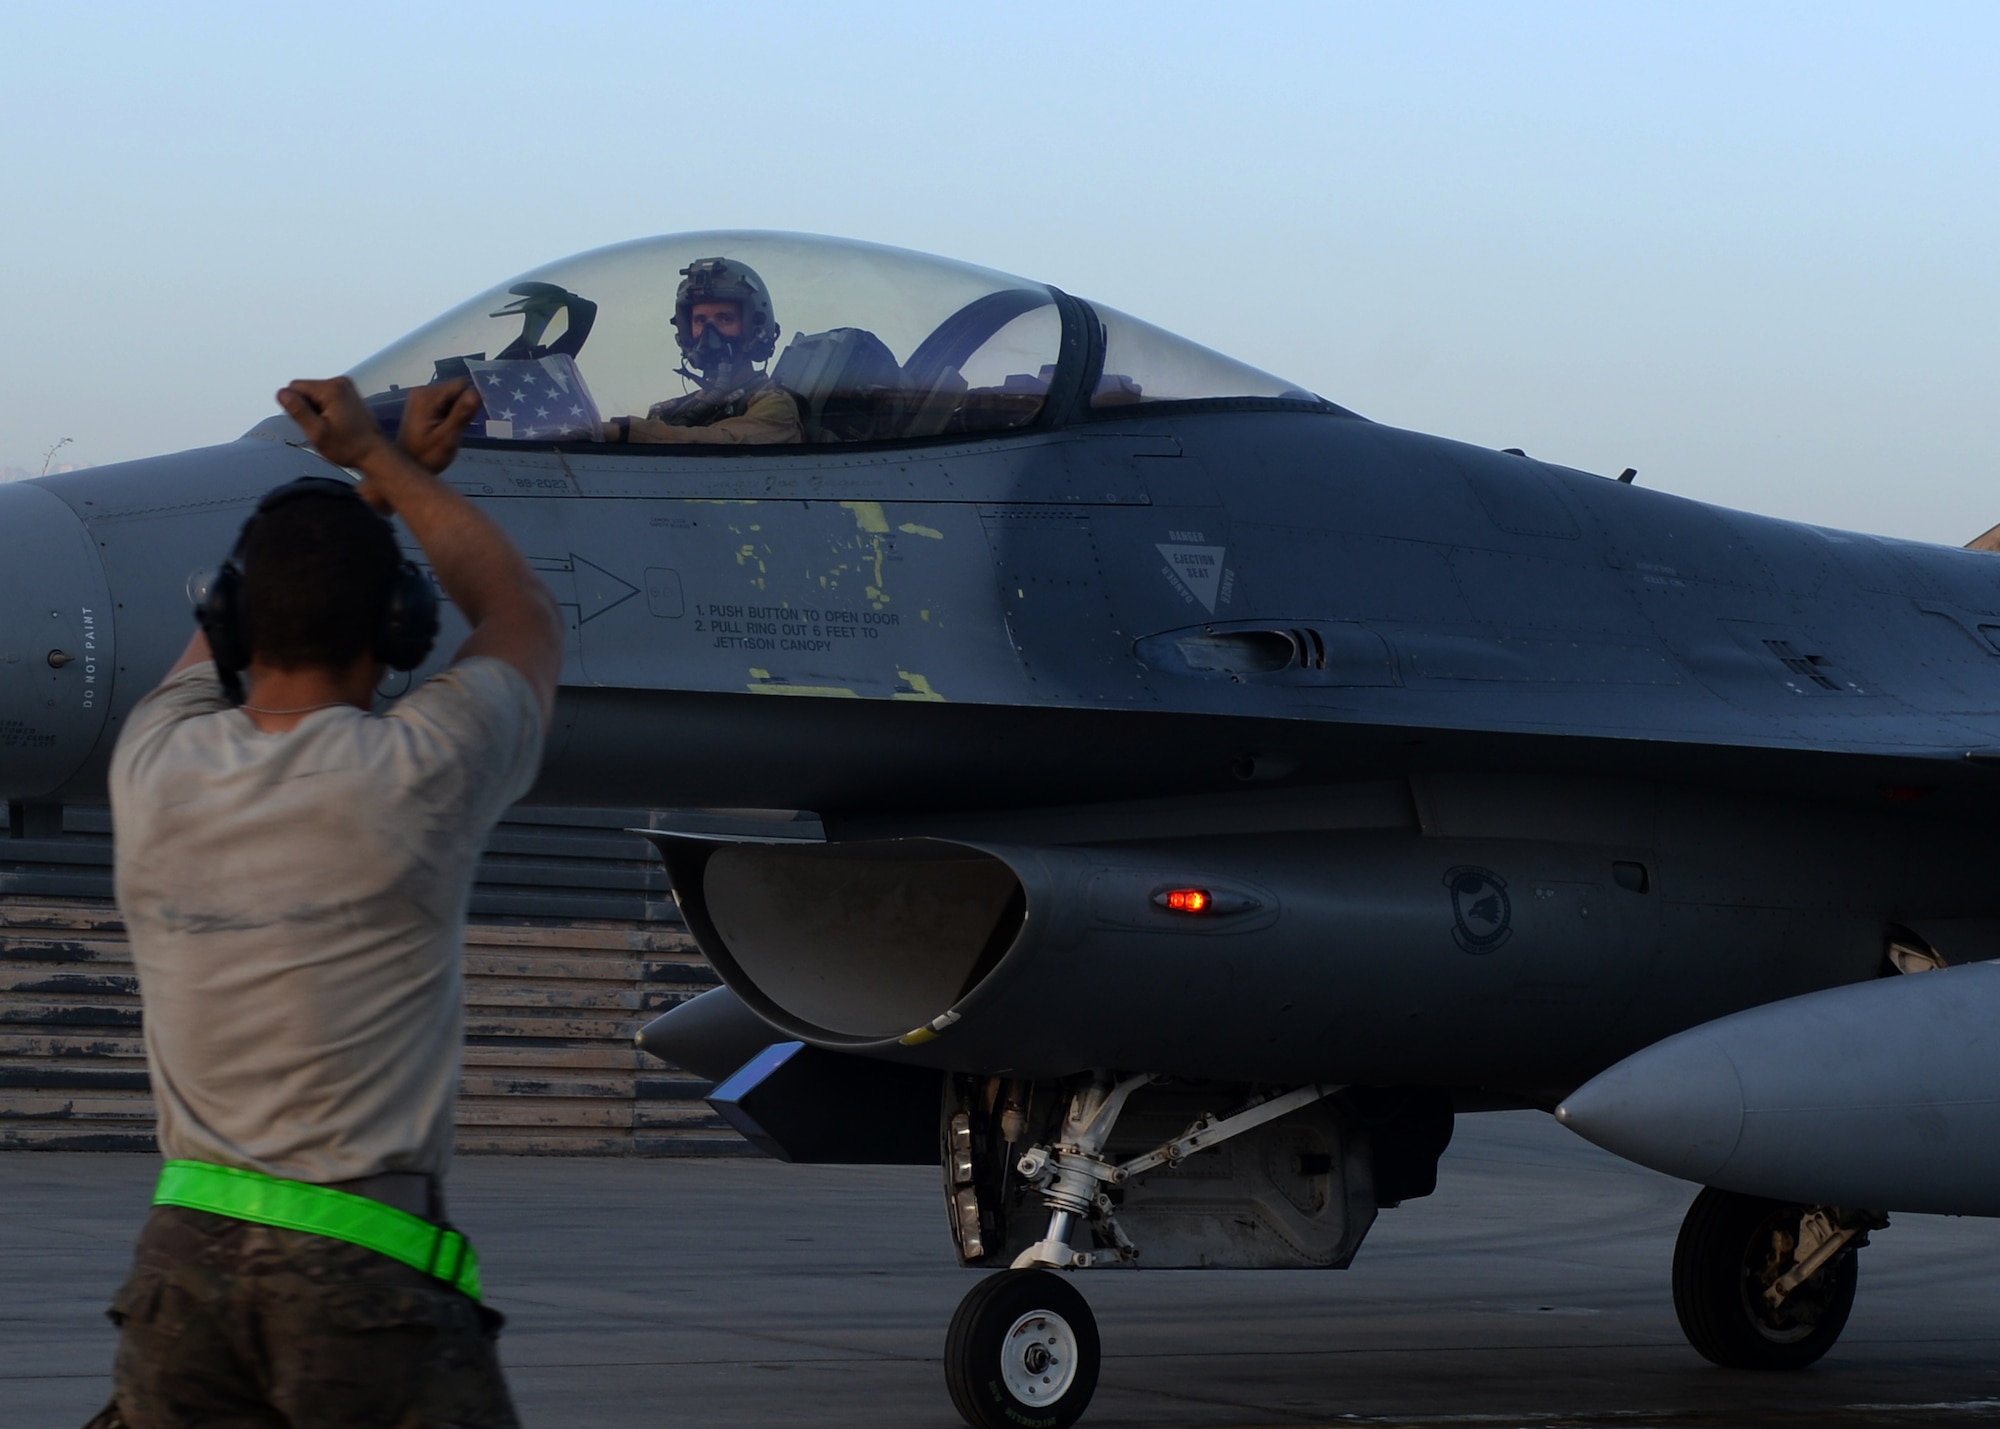 U.S. Air Force Capt. Dakota Olsen, 555th Expeditionary Fighter Squadron F-16 pilot, waits for a crew chiefs command to move before taking off June 17, 2015, at Bagram Airfield, Afghanistan. Olsen’s job is to provide close air support and armed over watch for military personnel in Afghanistan. He flies various sorties and missions throughout the country on a daily basis providing airpower to ensure a safe and secure environment for personnel at BAF. (U.S. Air Force photo by Senior Airman Cierra Presentado/Released)